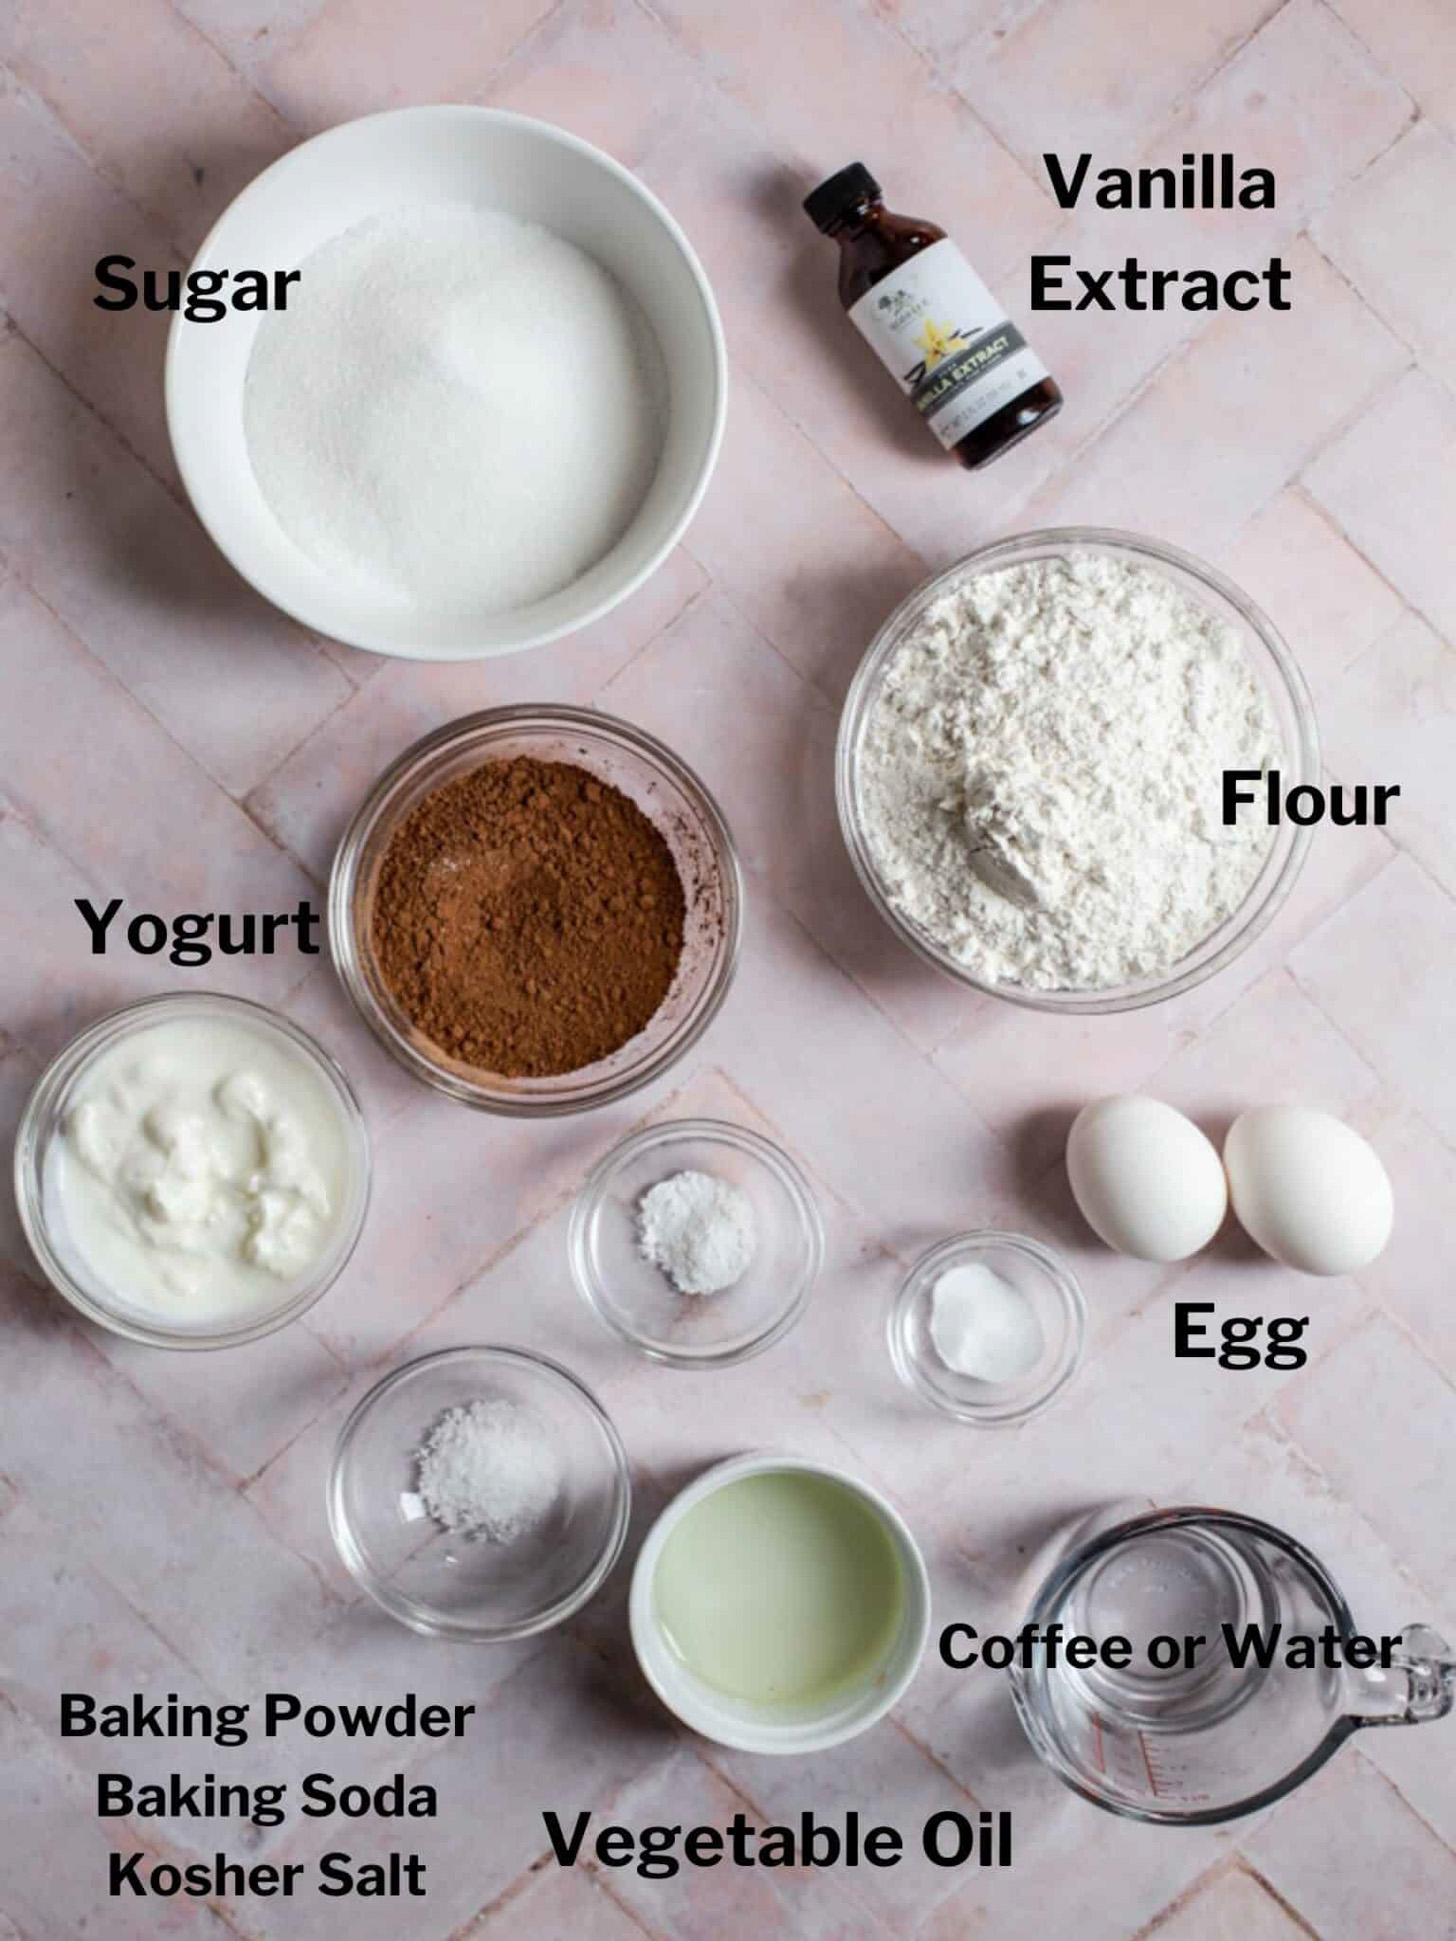 Ingredients for the Mississippi Mud Cake.